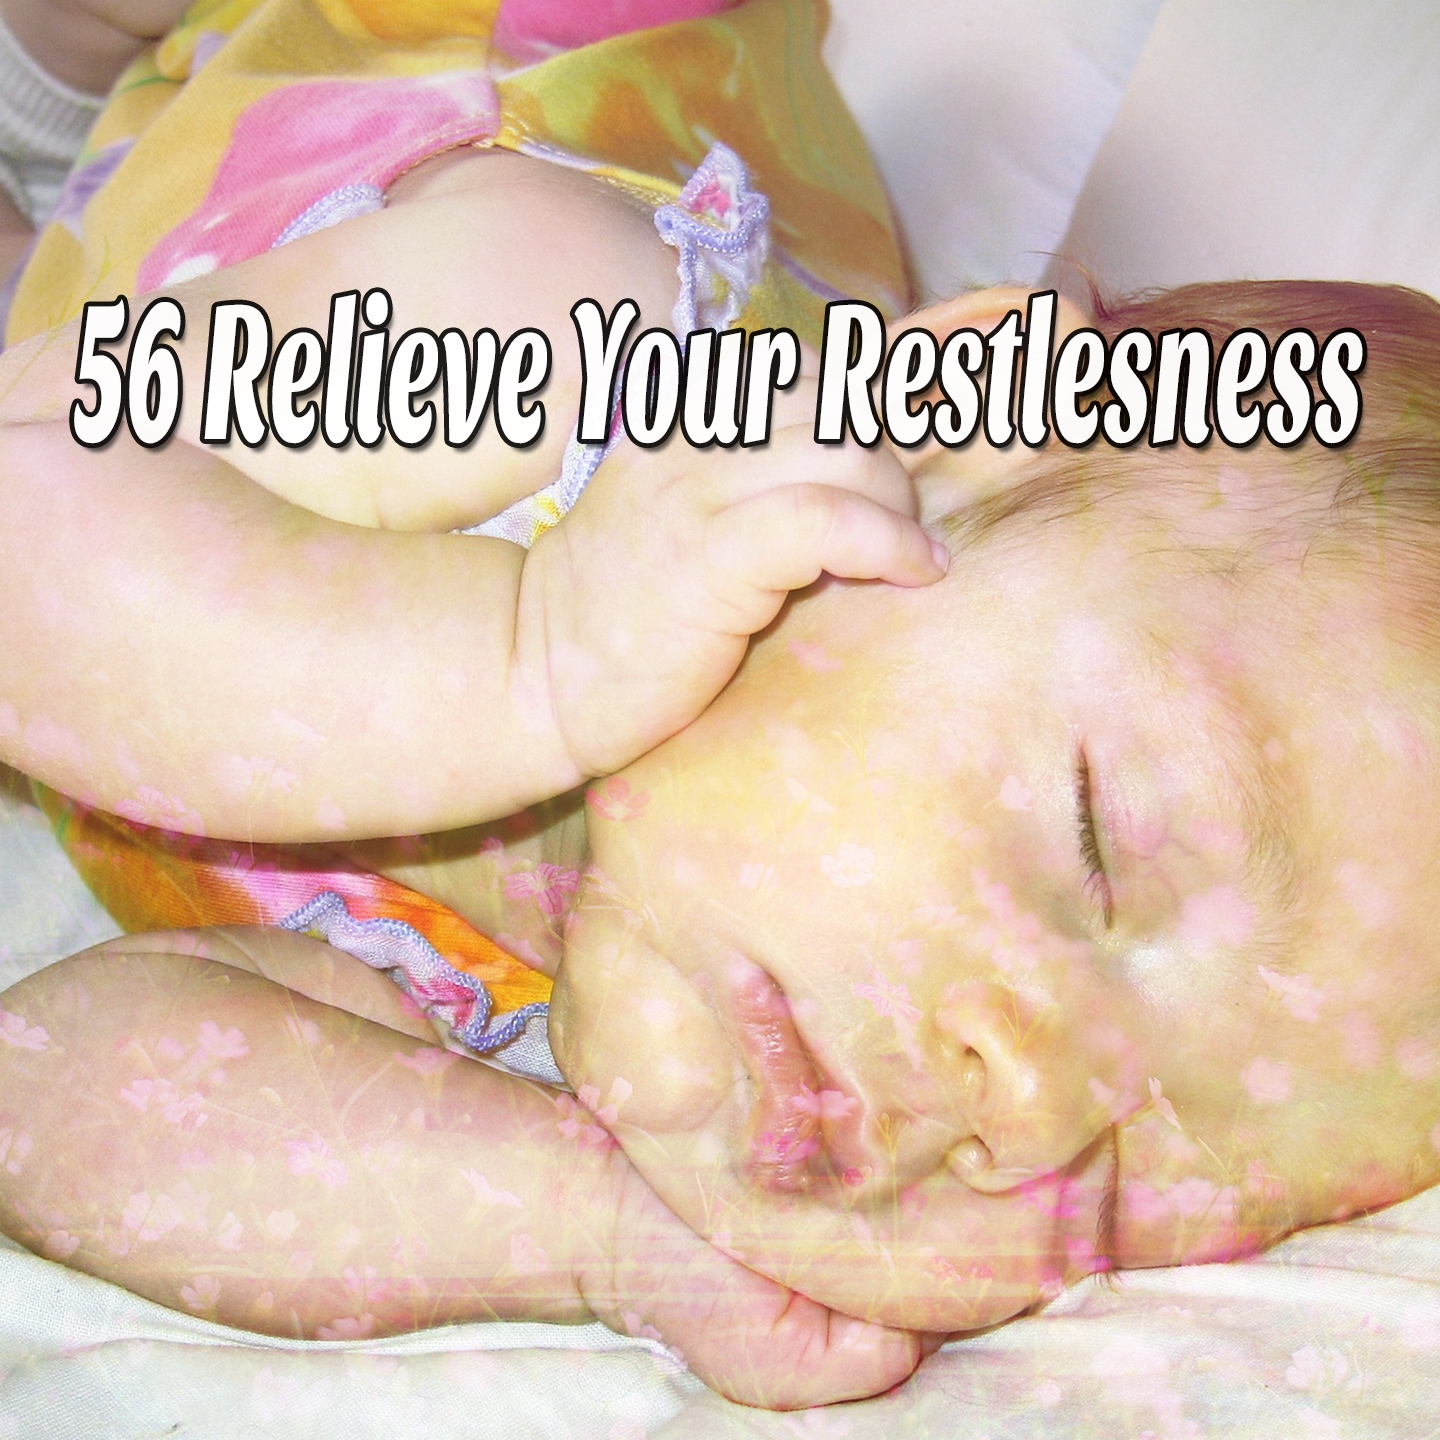 56 Relieve Your Restlesness